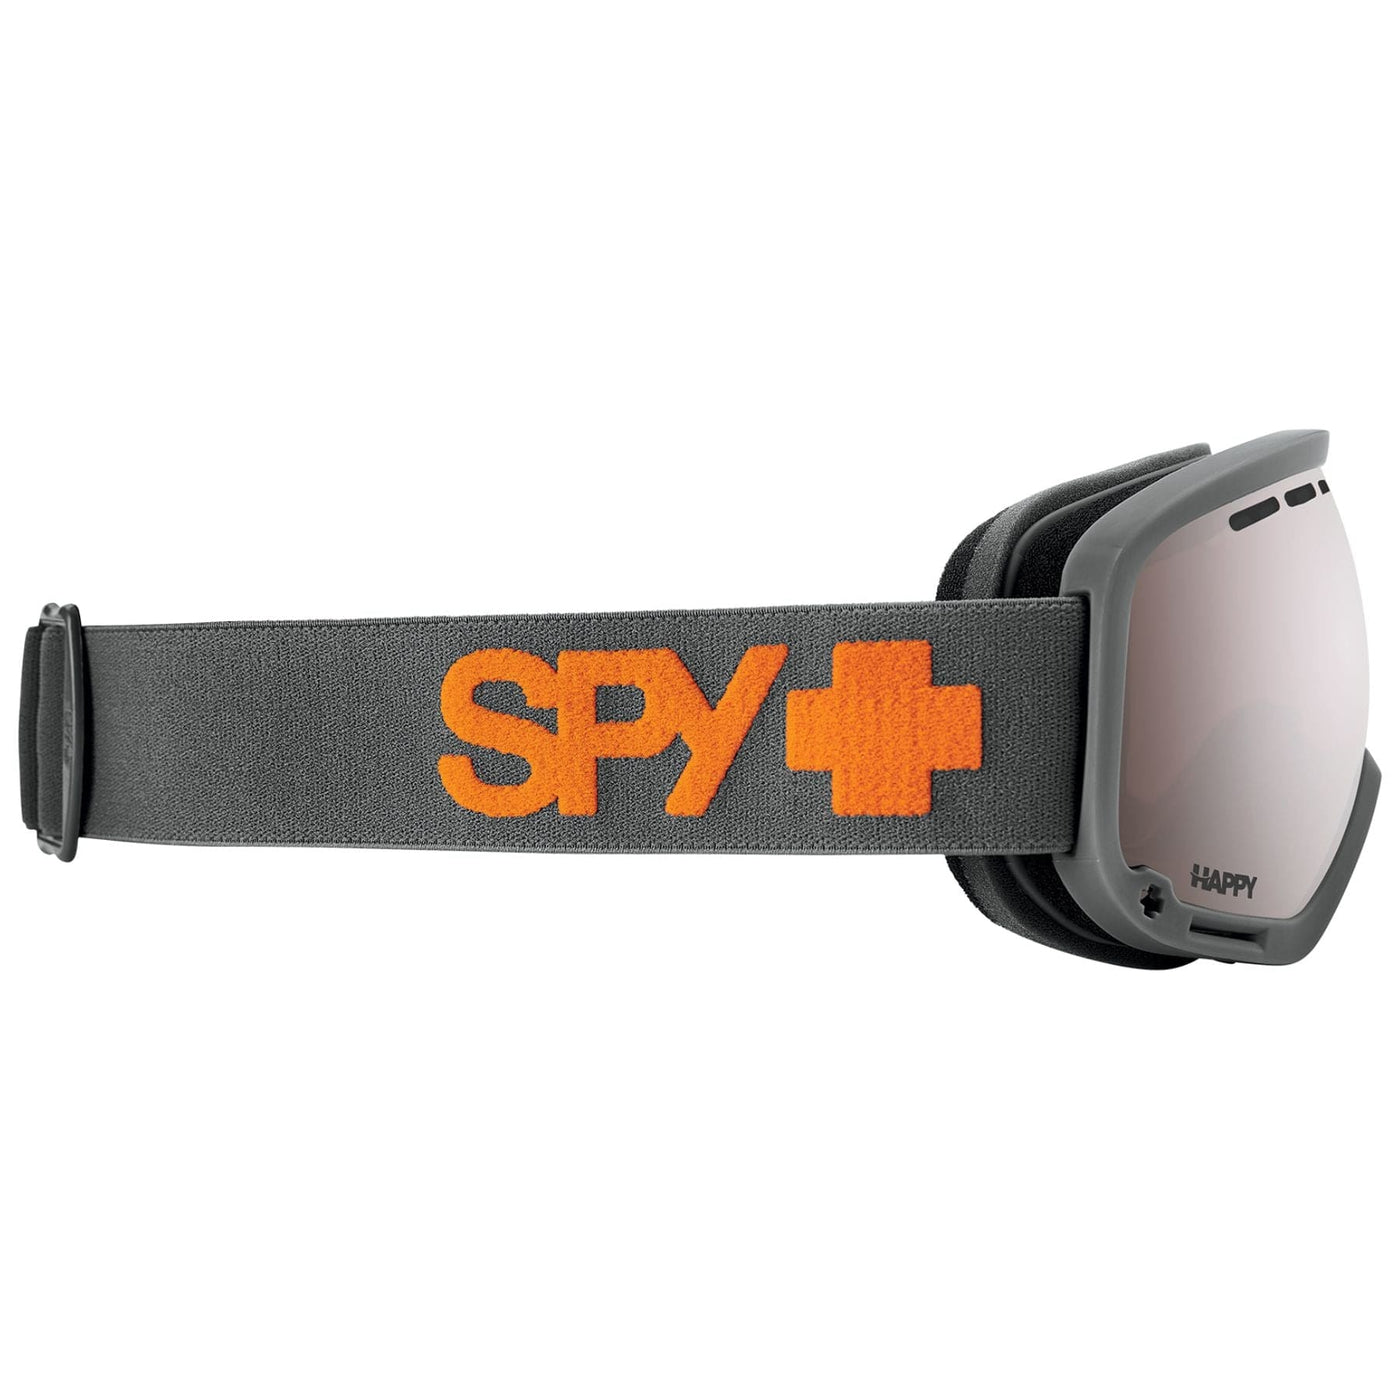 SPY Marshall Snow Goggles - Matte Gray 8Lines Shop - Fast Shipping